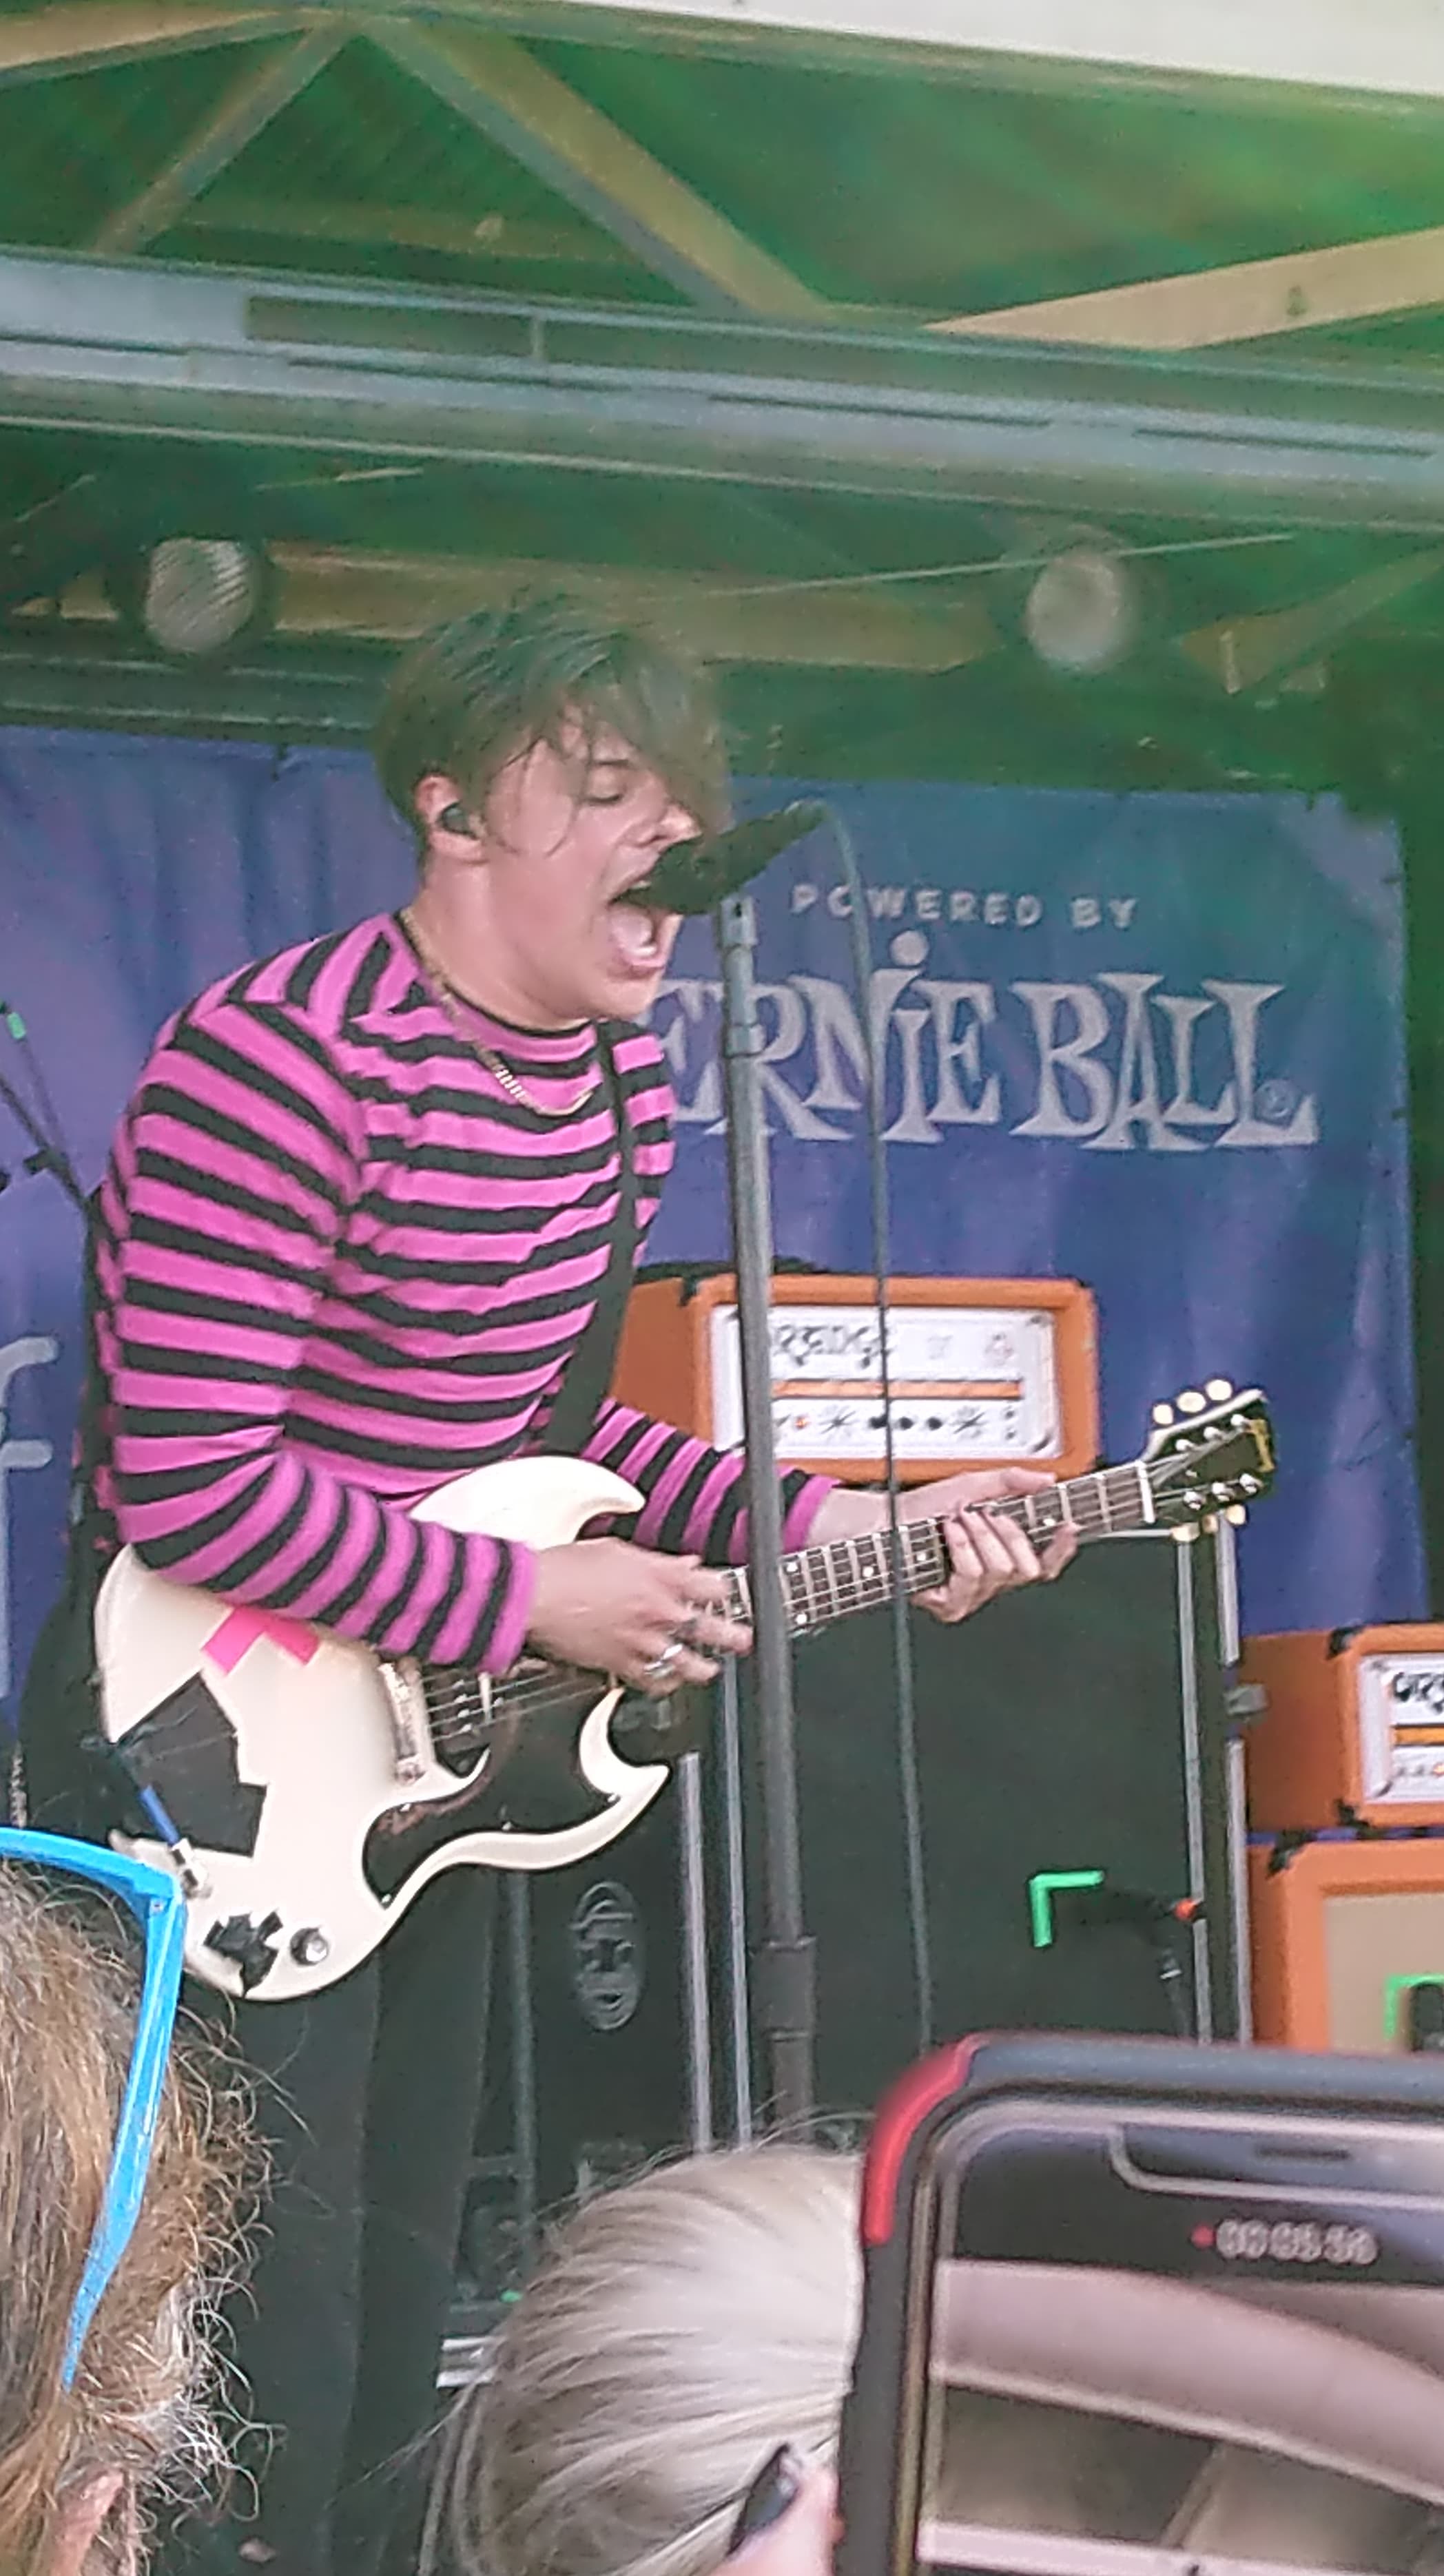 Yungblud (Andy Andreas) Warped Tour